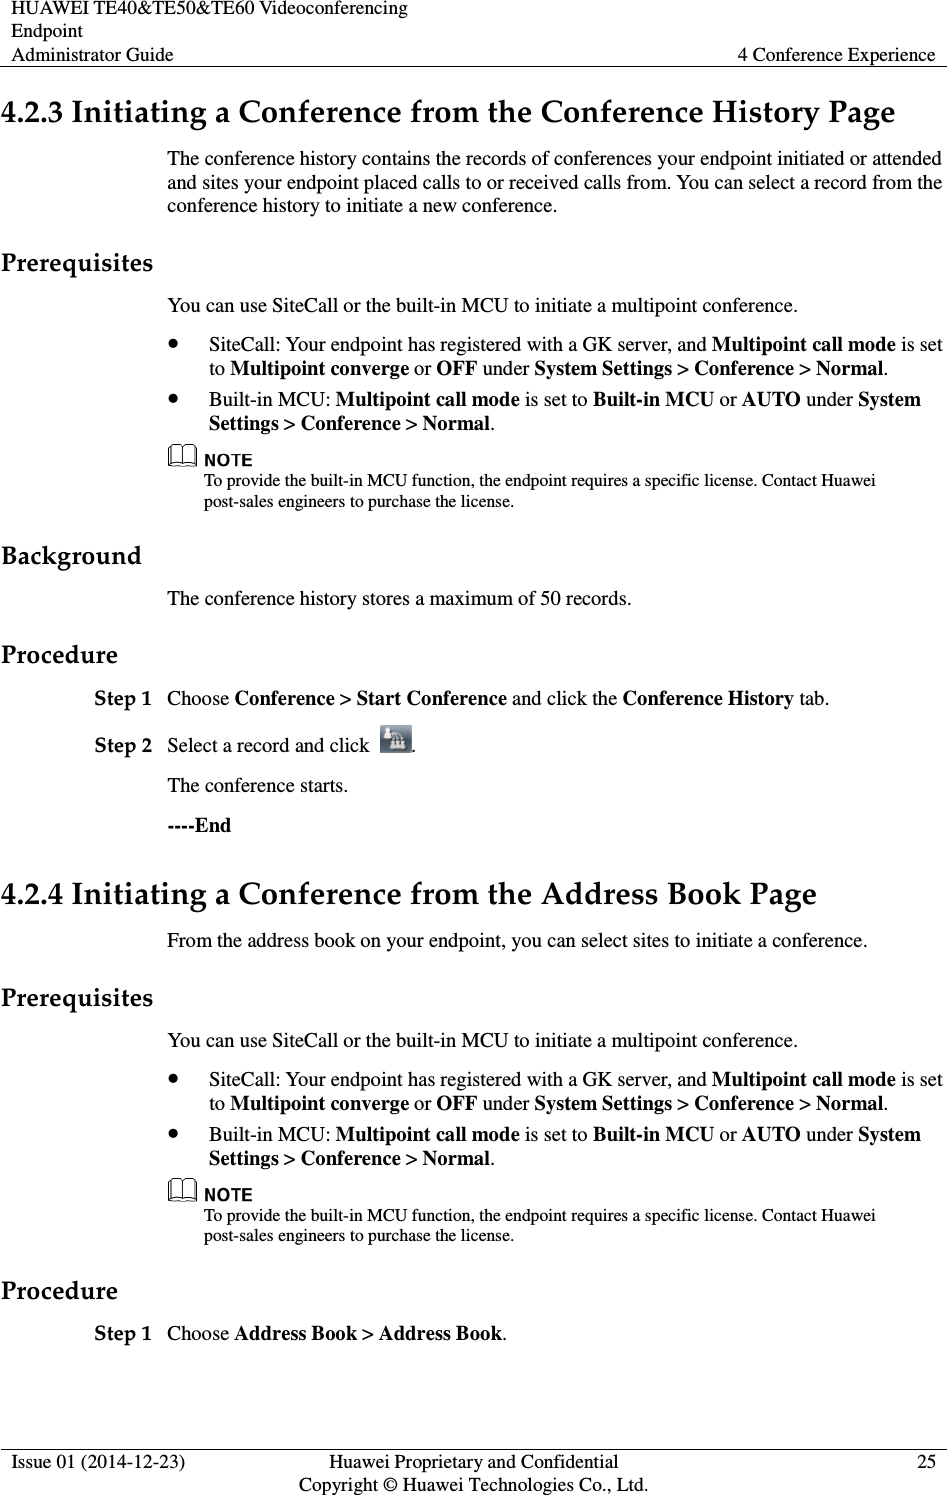 HUAWEI TE40&amp;TE50&amp;TE60 Videoconferencing Endpoint Administrator Guide  4 Conference Experience  Issue 01 (2014-12-23)  Huawei Proprietary and Confidential                                     Copyright © Huawei Technologies Co., Ltd. 25  4.2.3 Initiating a Conference from the Conference History Page The conference history contains the records of conferences your endpoint initiated or attended and sites your endpoint placed calls to or received calls from. You can select a record from the conference history to initiate a new conference. Prerequisites You can use SiteCall or the built-in MCU to initiate a multipoint conference.  SiteCall: Your endpoint has registered with a GK server, and Multipoint call mode is set to Multipoint converge or OFF under System Settings &gt; Conference &gt; Normal.  Built-in MCU: Multipoint call mode is set to Built-in MCU or AUTO under System Settings &gt; Conference &gt; Normal.    To provide the built-in MCU function, the endpoint requires a specific license. Contact Huawei post-sales engineers to purchase the license. Background The conference history stores a maximum of 50 records. Procedure Step 1 Choose Conference &gt; Start Conference and click the Conference History tab. Step 2 Select a record and click  . The conference starts. ----End 4.2.4 Initiating a Conference from the Address Book Page From the address book on your endpoint, you can select sites to initiate a conference. Prerequisites You can use SiteCall or the built-in MCU to initiate a multipoint conference.  SiteCall: Your endpoint has registered with a GK server, and Multipoint call mode is set to Multipoint converge or OFF under System Settings &gt; Conference &gt; Normal.  Built-in MCU: Multipoint call mode is set to Built-in MCU or AUTO under System Settings &gt; Conference &gt; Normal.  To provide the built-in MCU function, the endpoint requires a specific license. Contact Huawei post-sales engineers to purchase the license. Procedure Step 1 Choose Address Book &gt; Address Book. 